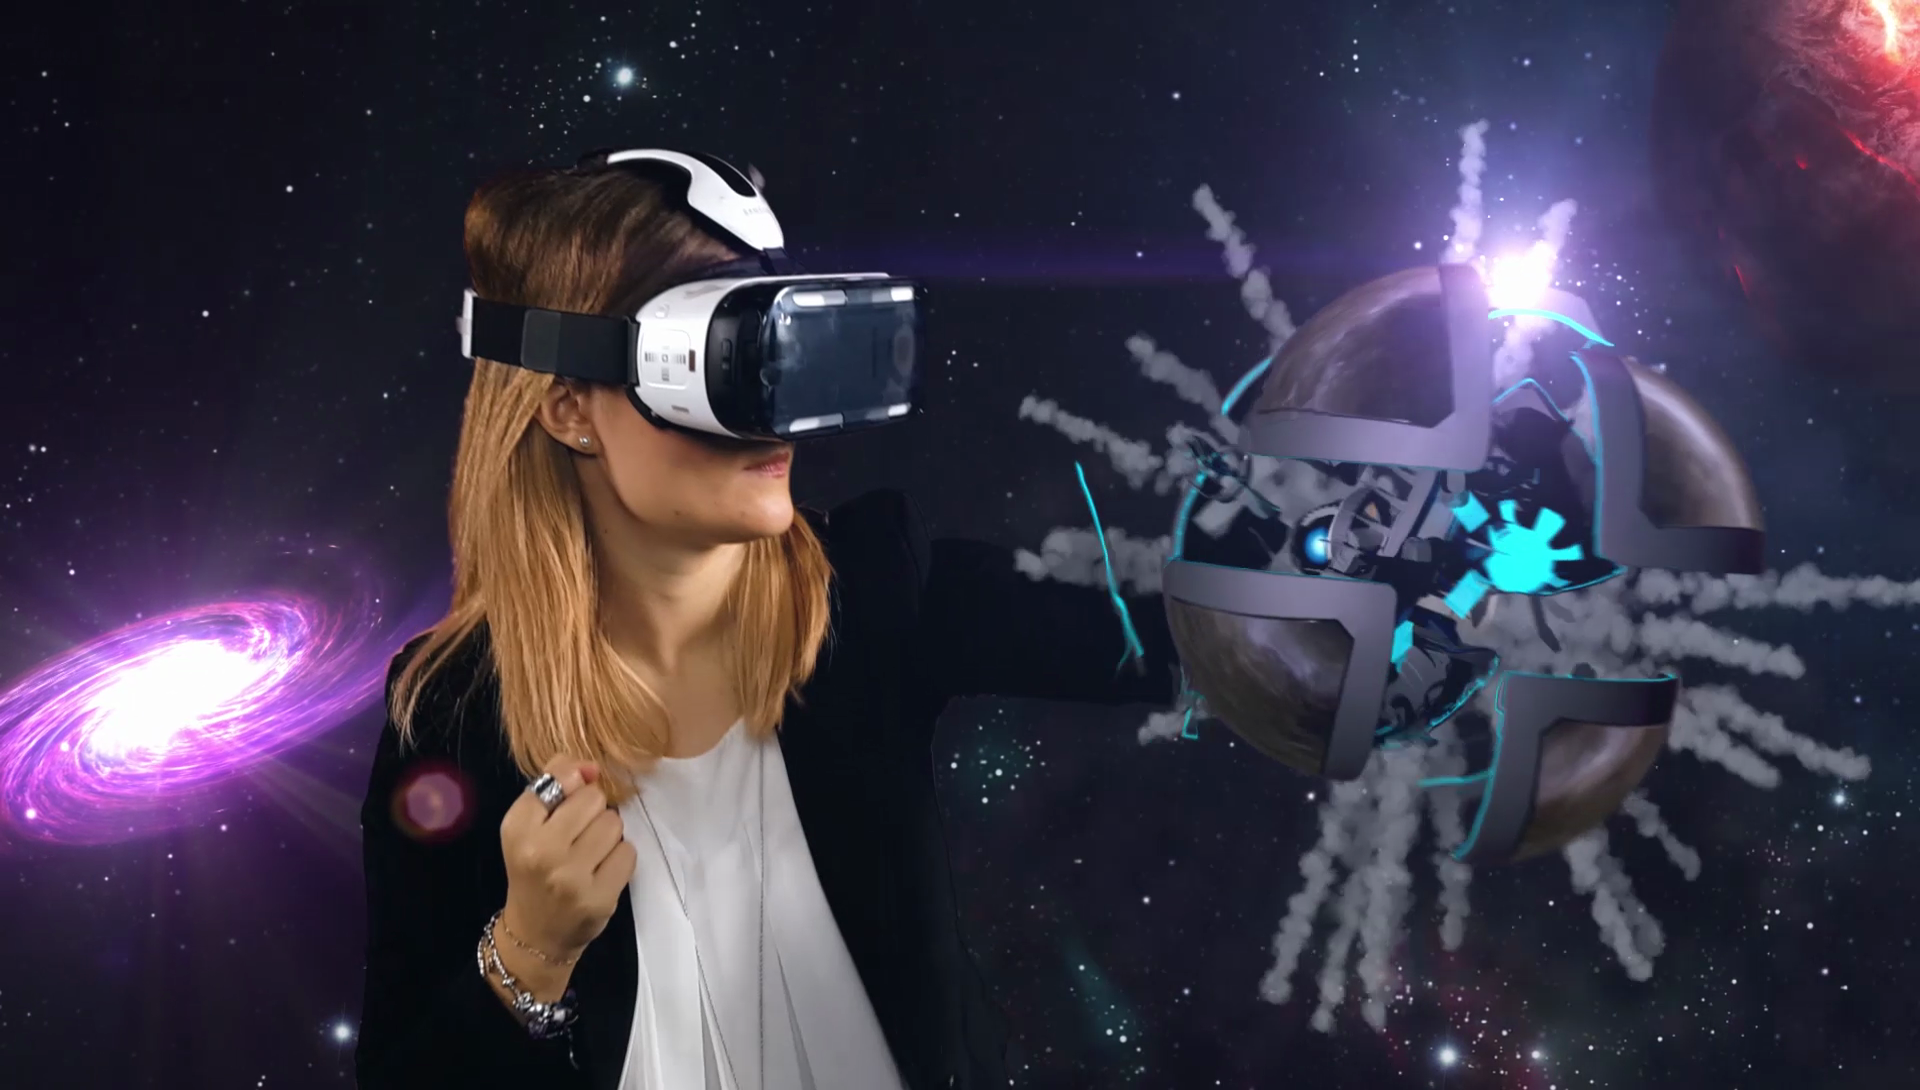 Virtual Reality isn’t a fad, it will succeed at the right time